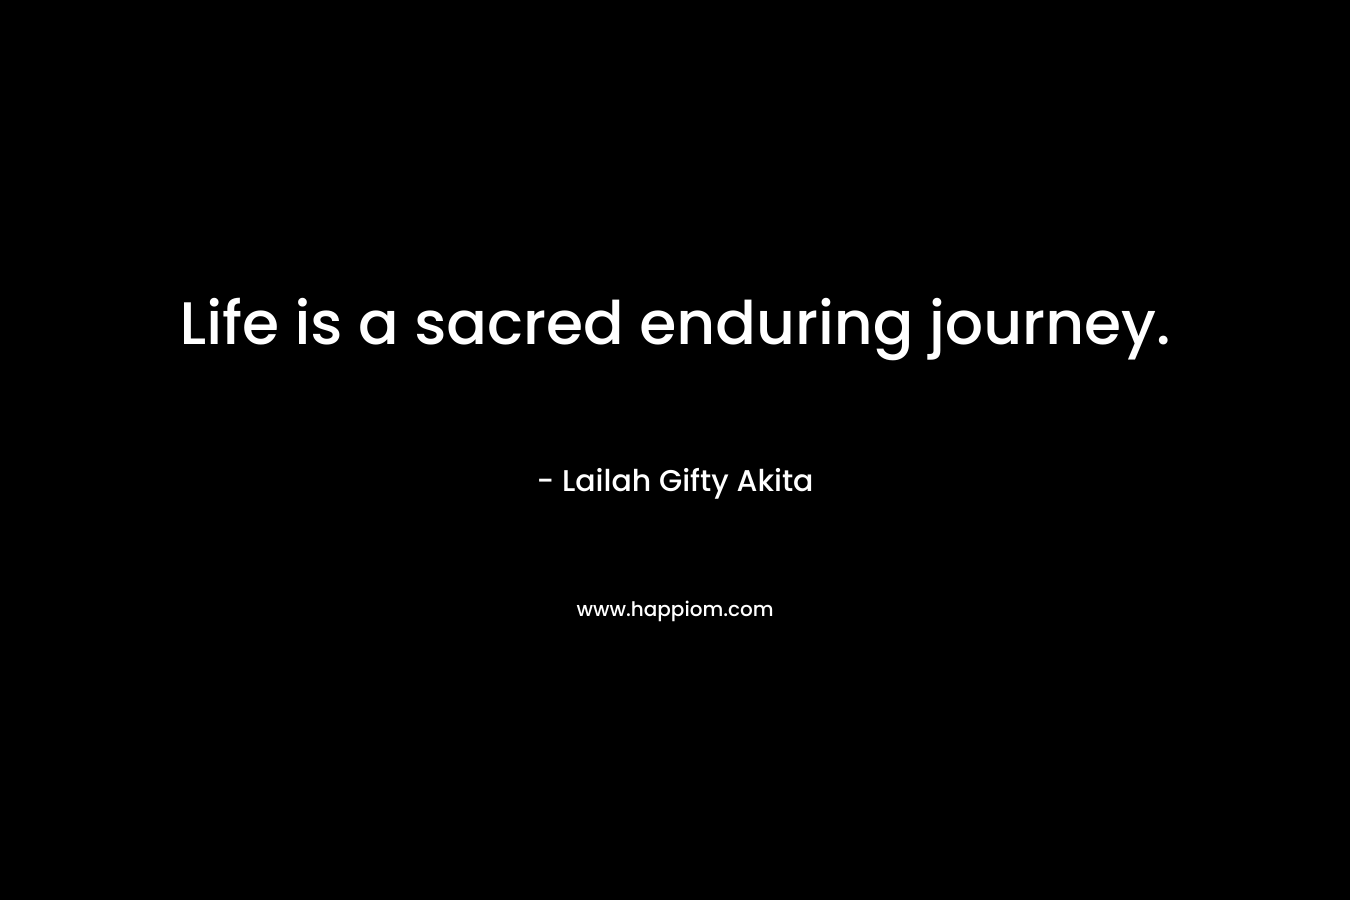 Life is a sacred enduring journey.